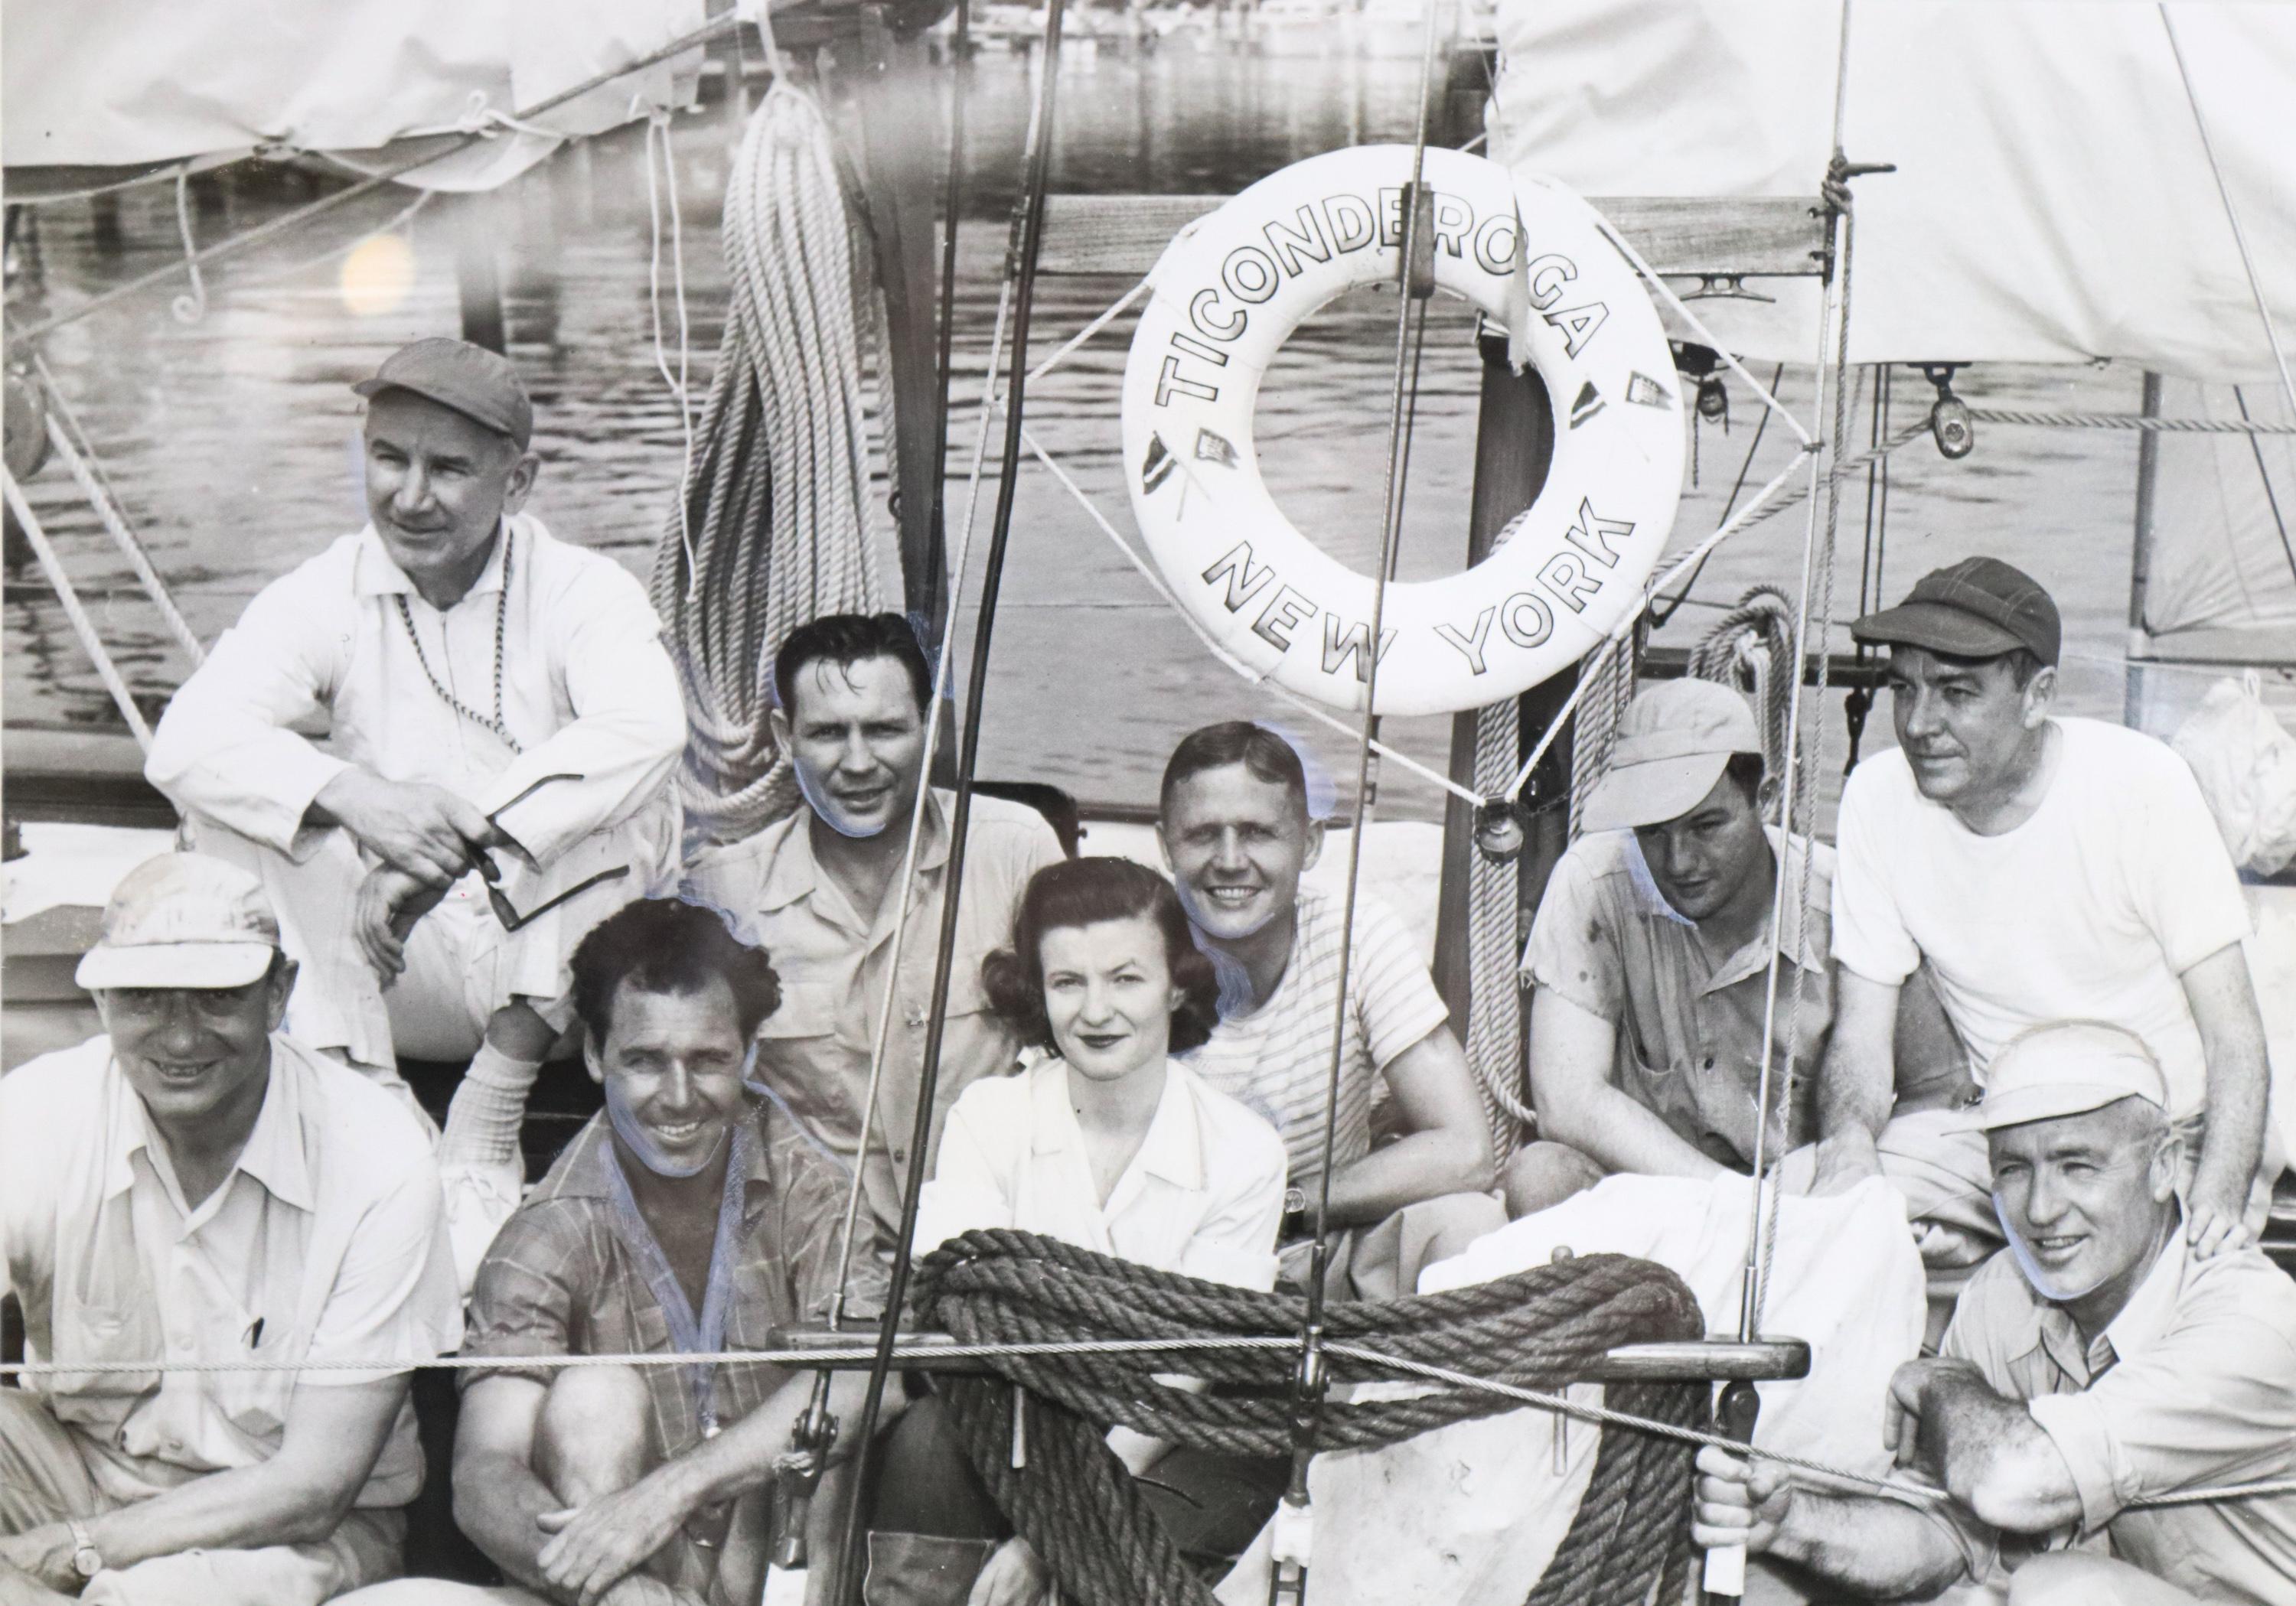 Original historic photograph of the crew on deck of the Ticonderoga of New York. Matted and framed.

Measures: 13